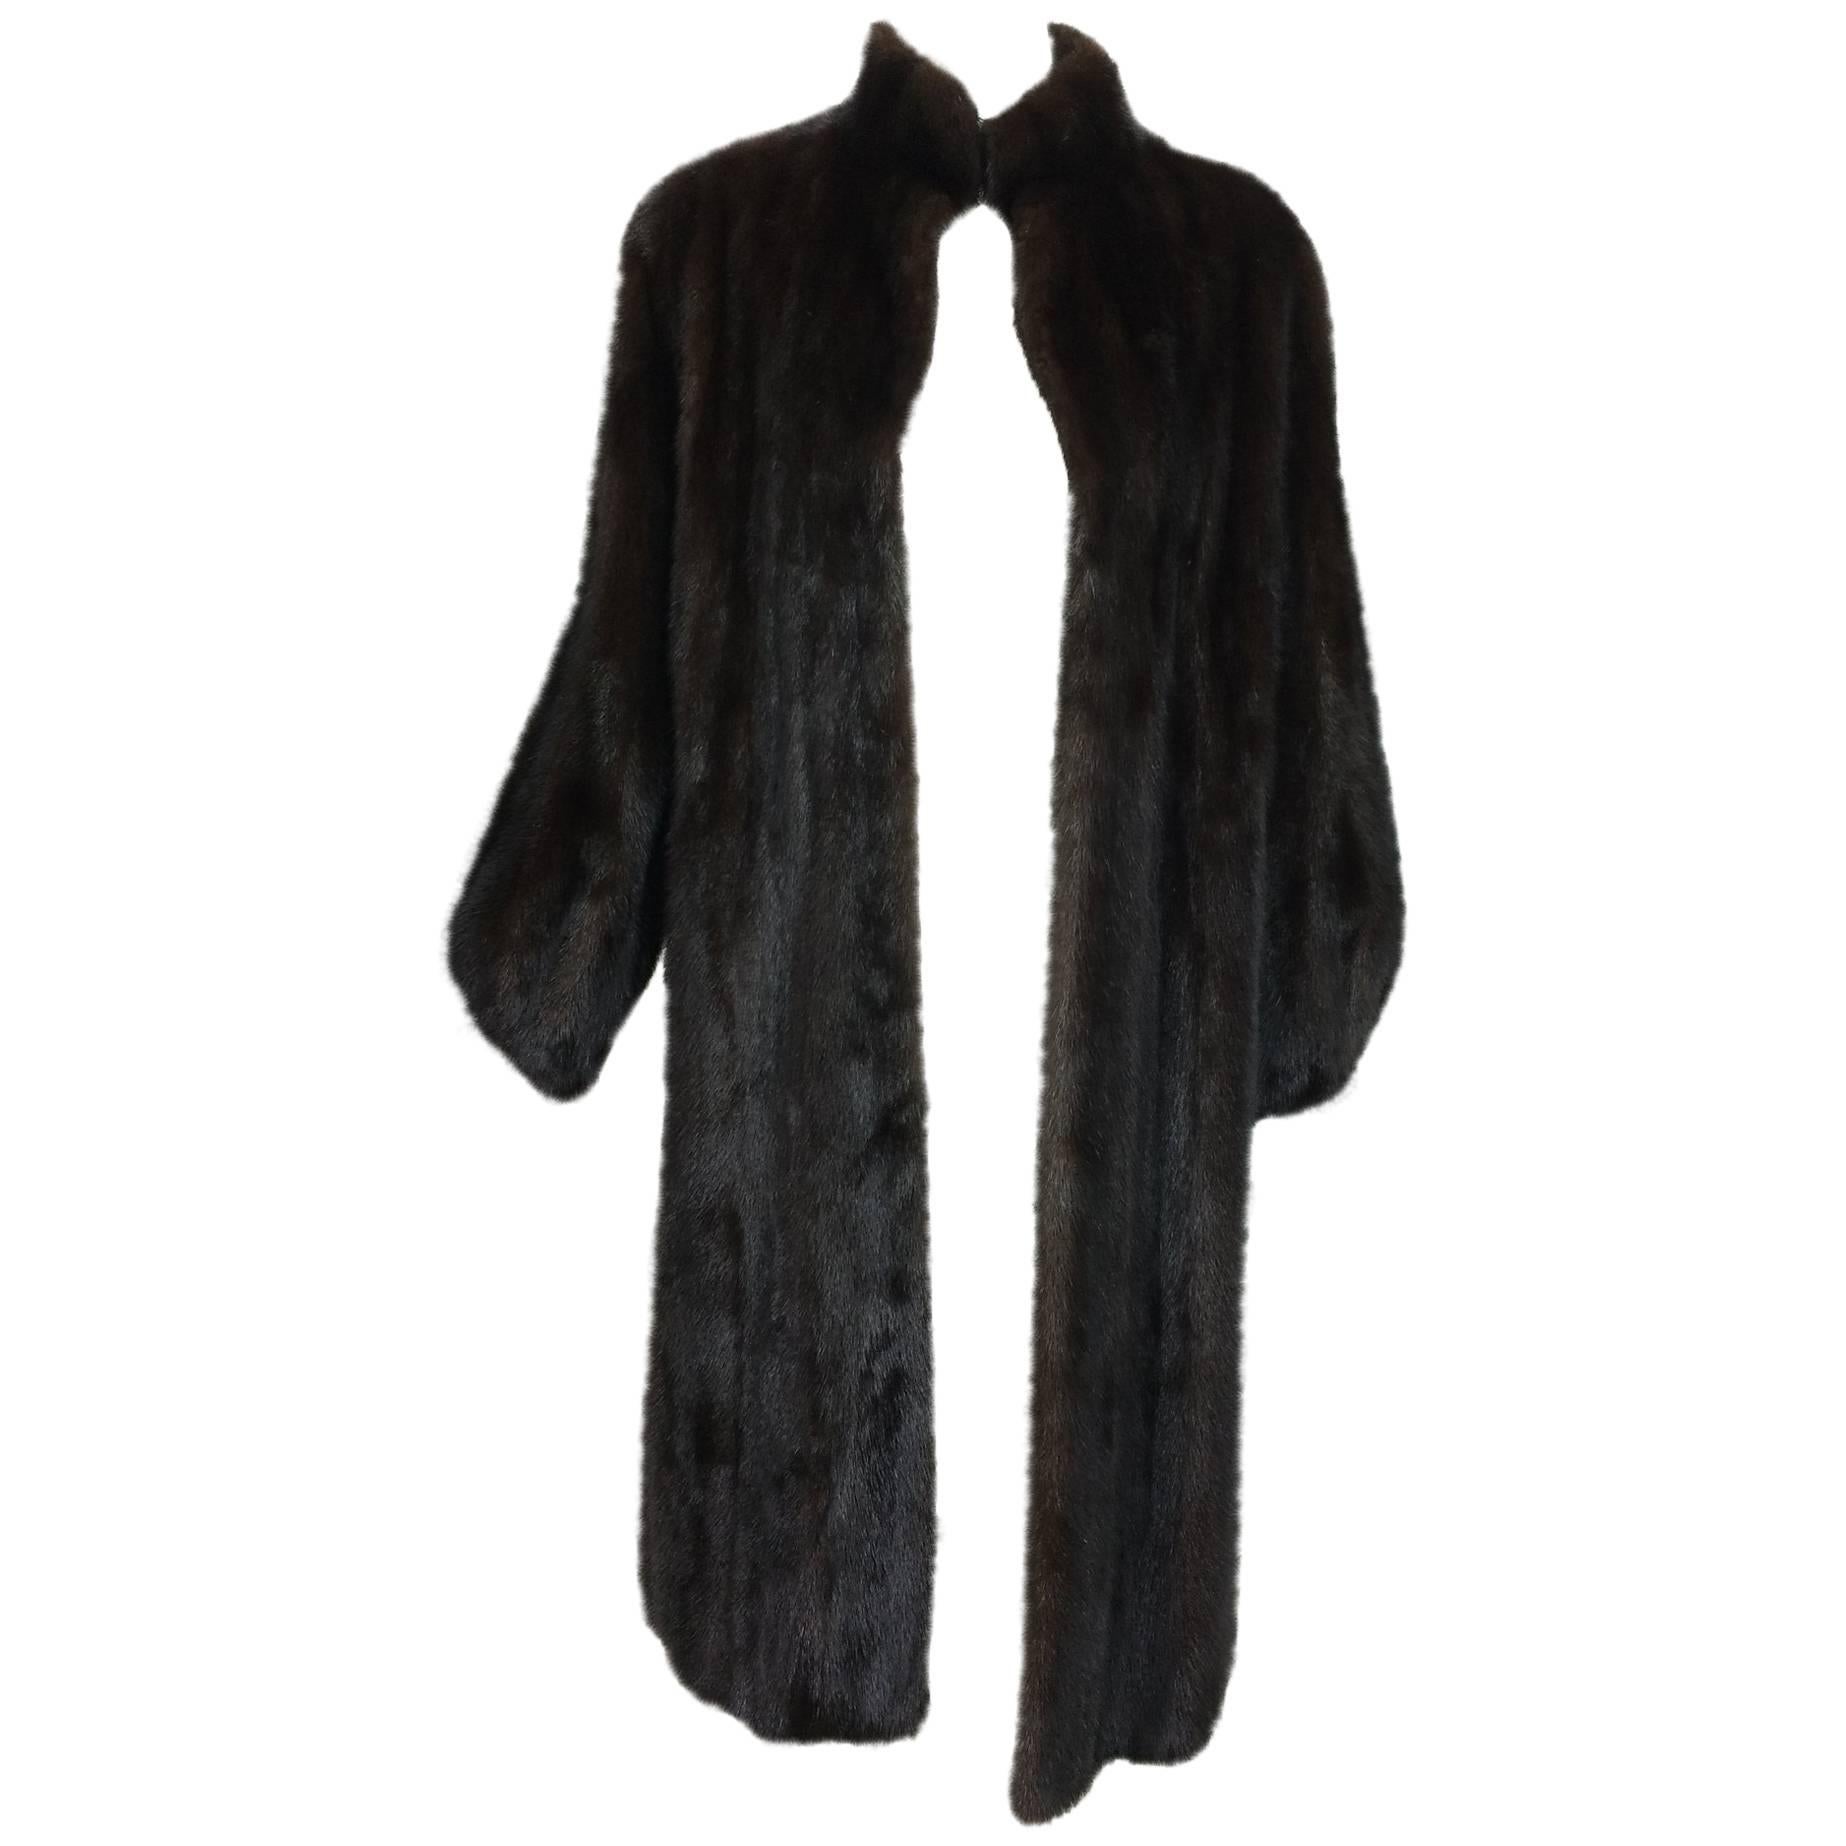 Full length lustrous dark mink coat with gathered cuffs 1960s